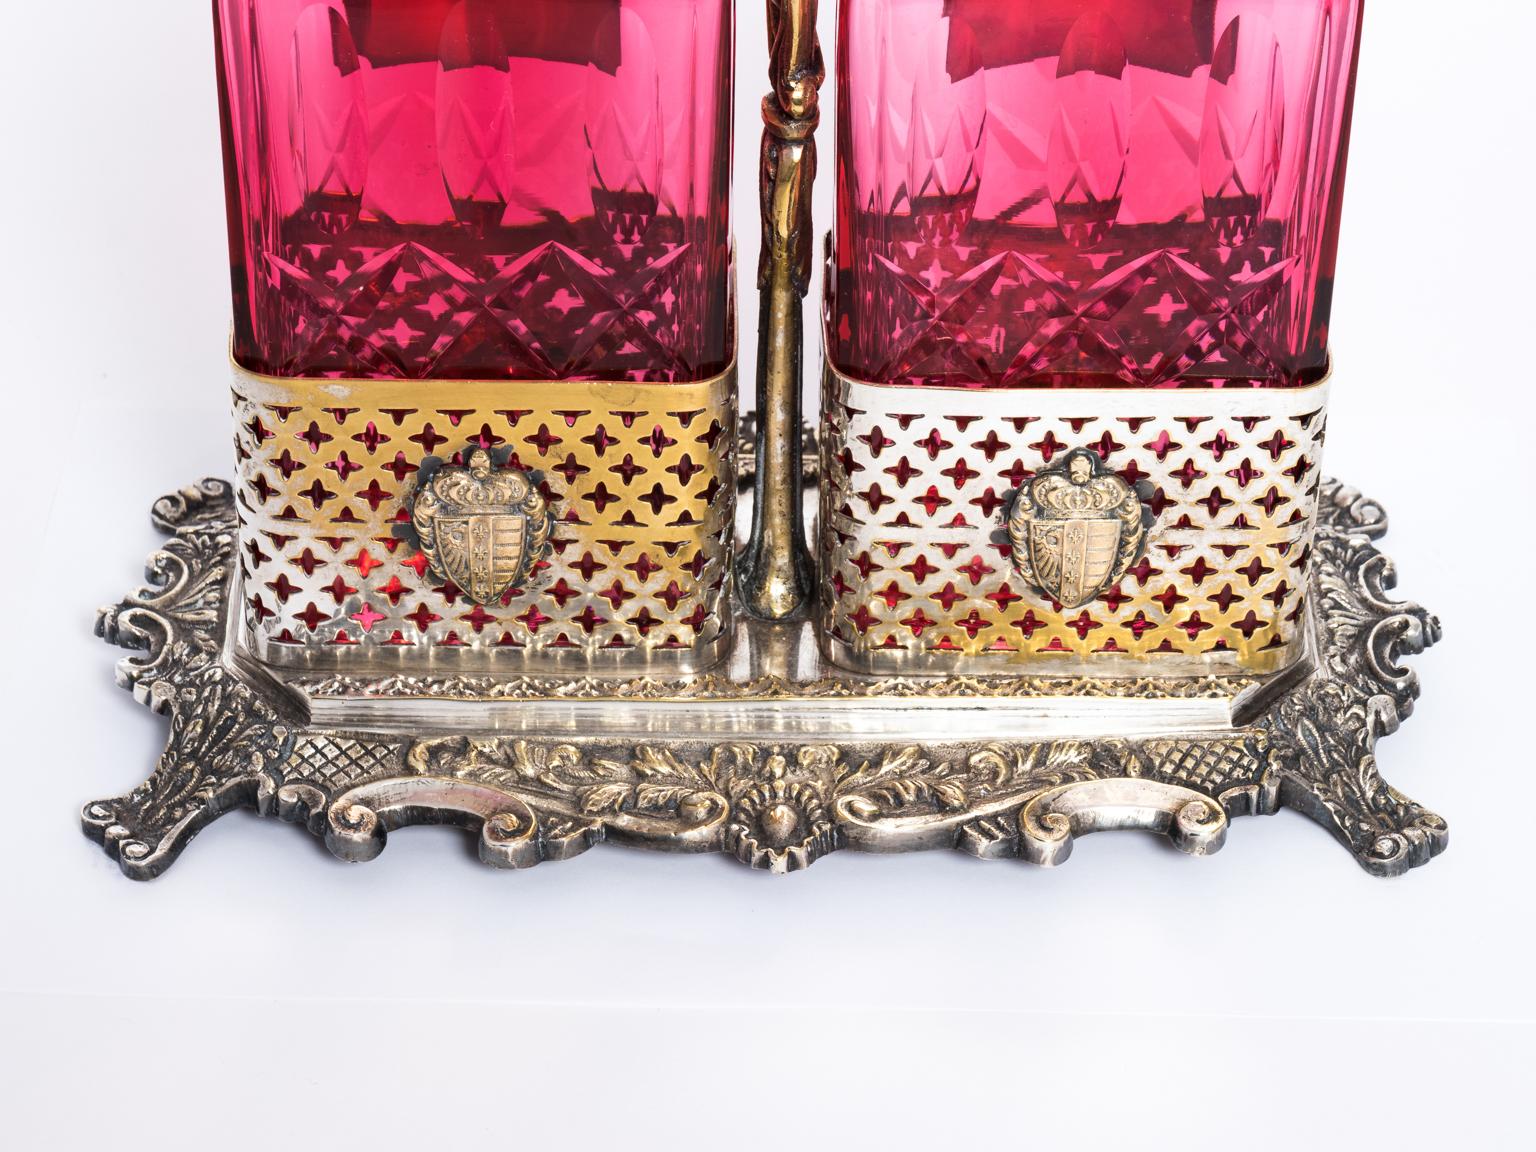 Cranberry/Cut Crystal Decanter Set English Ornate Plated Holder 11